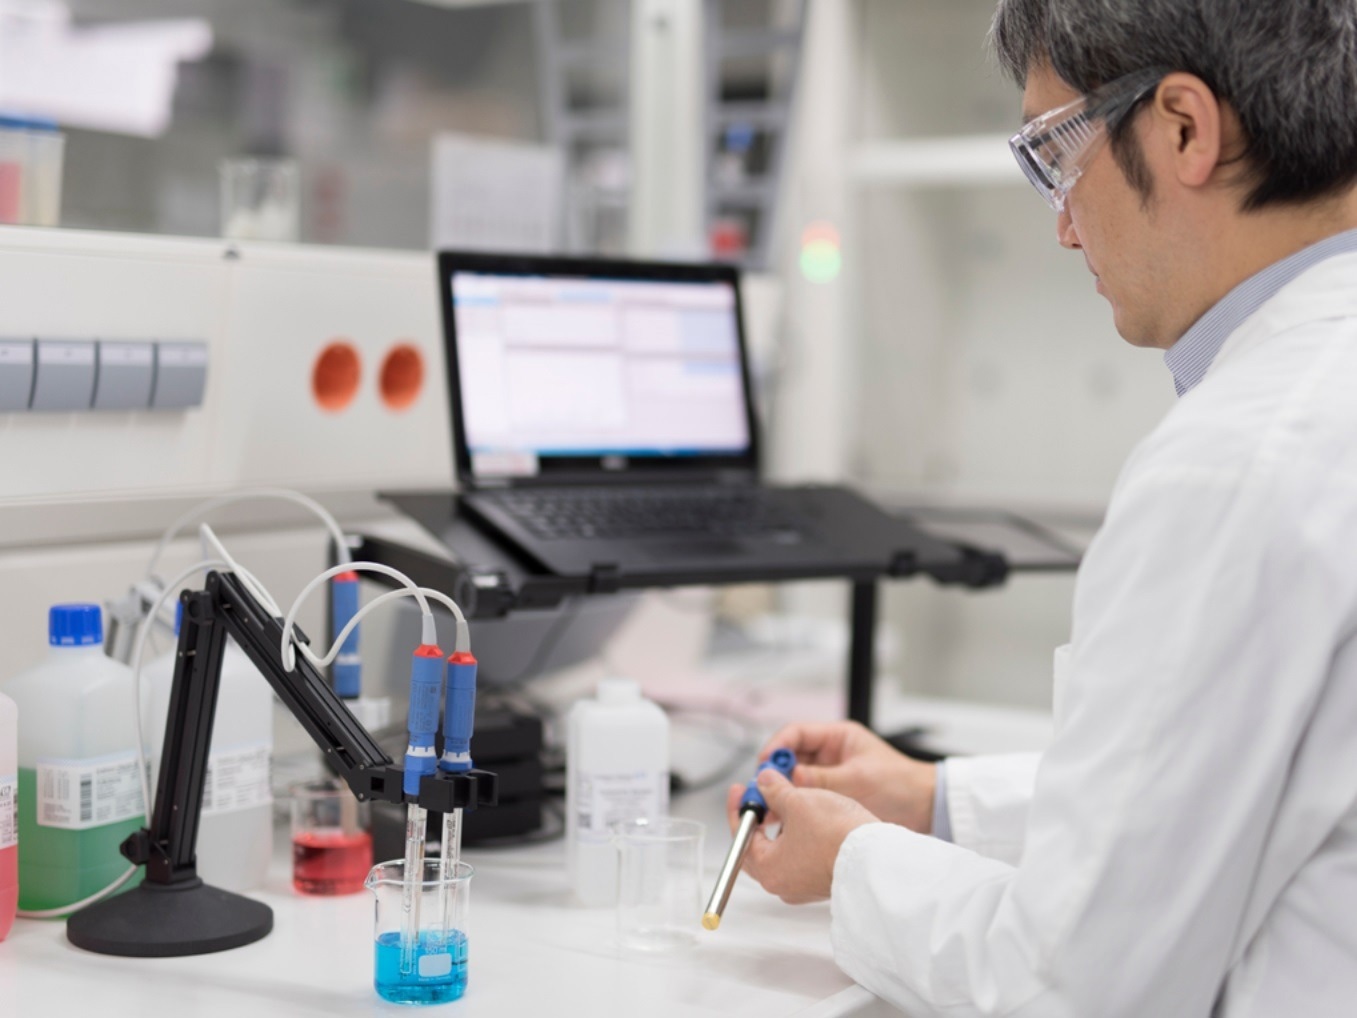 How to use lab-to-process measurements in production